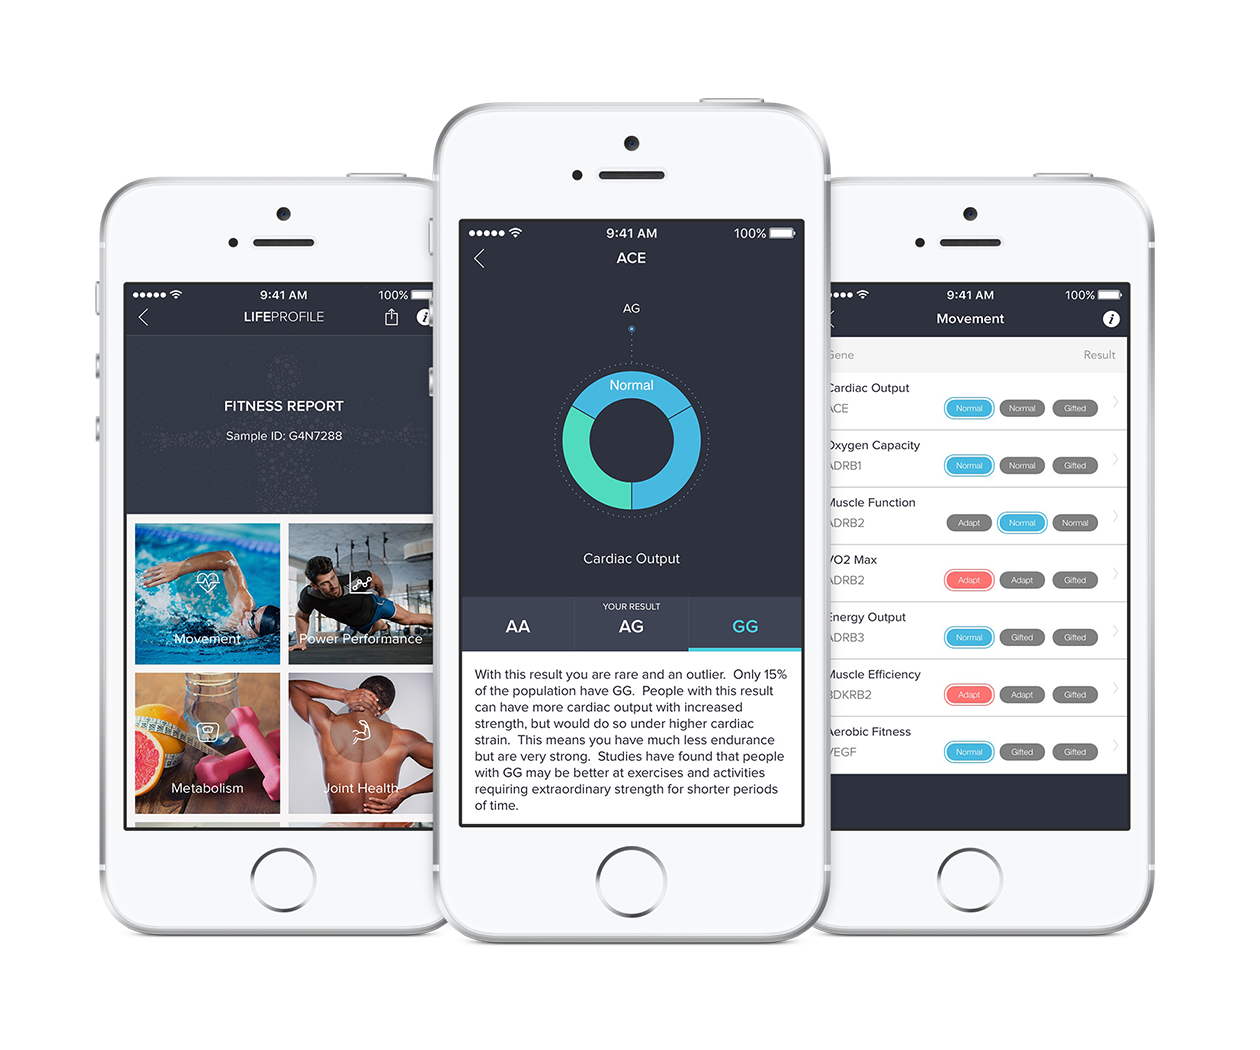 Fitness DNA Test Results on the Mobile App